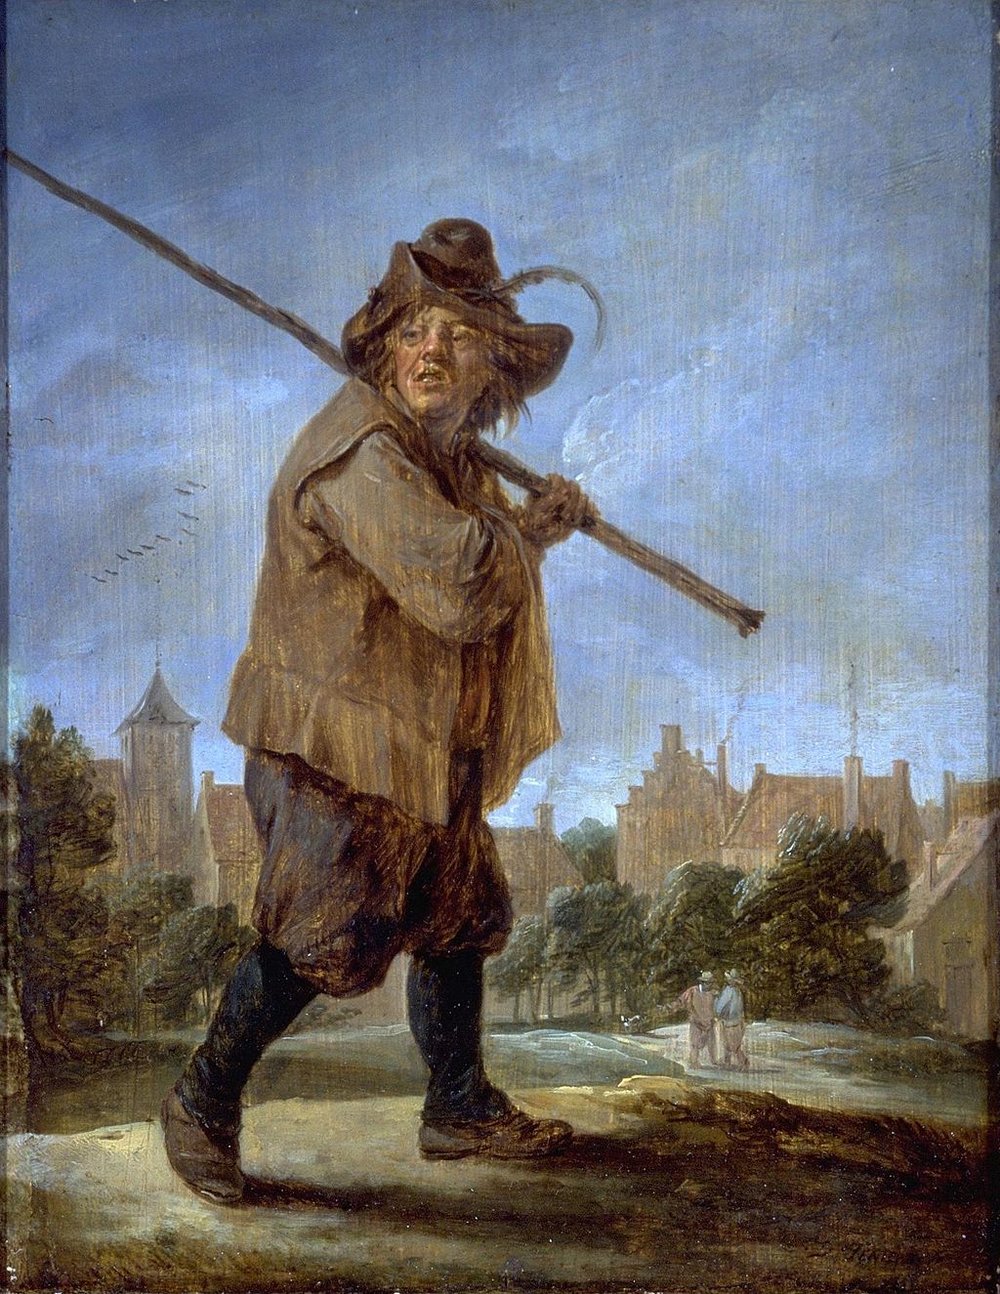 Peasant Walking, by David Teniers the Younger, circa 1670